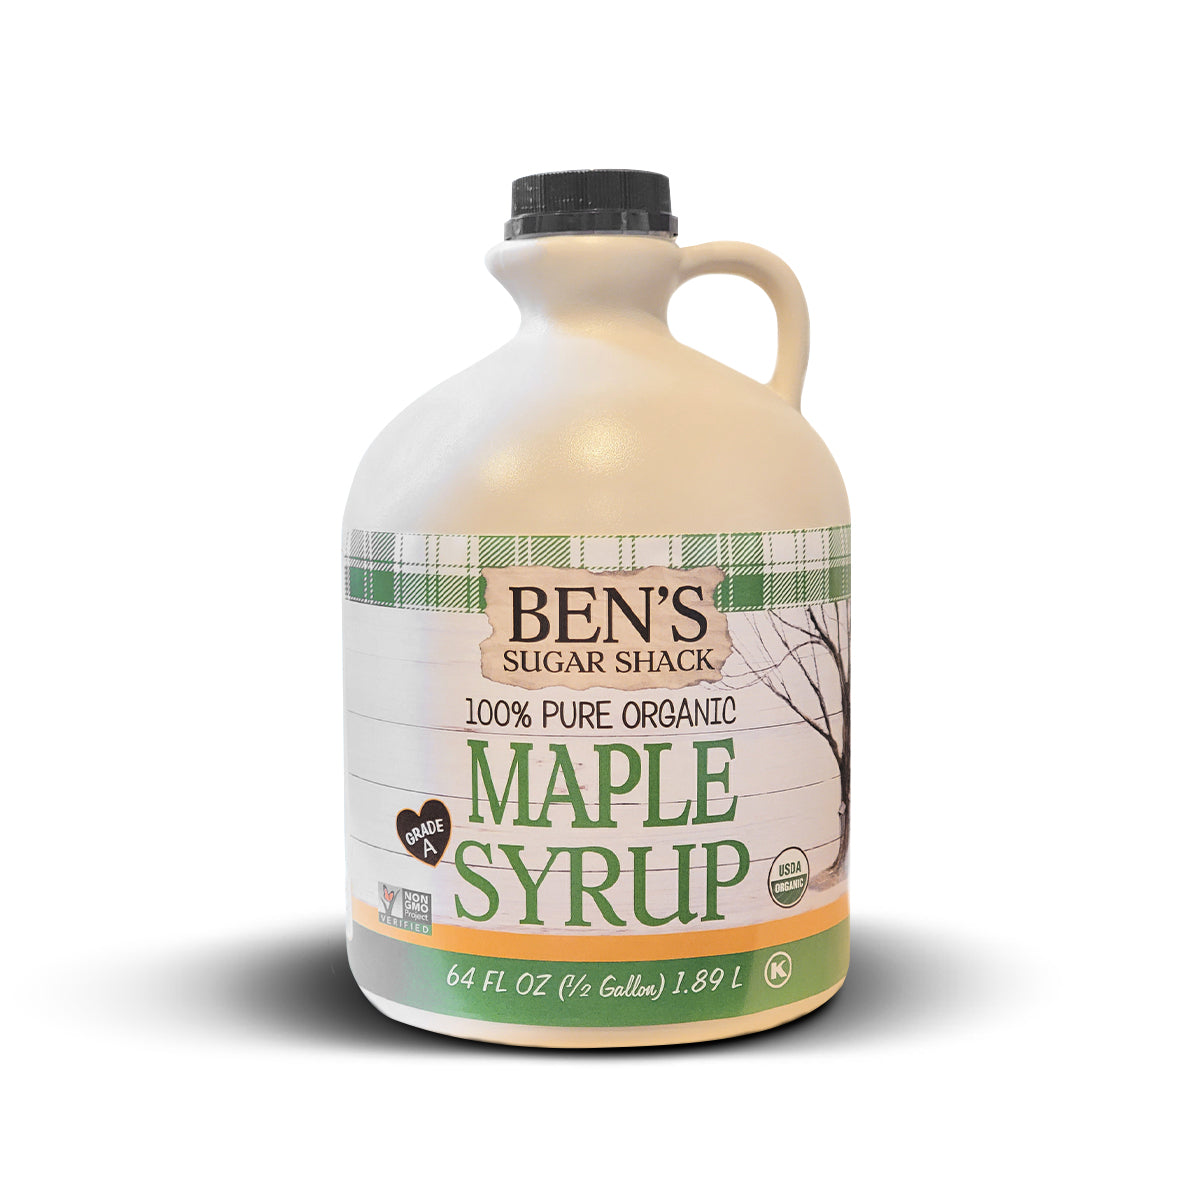 Organic Pure Maple Syrup in Plastic Jugs (All Sizes)